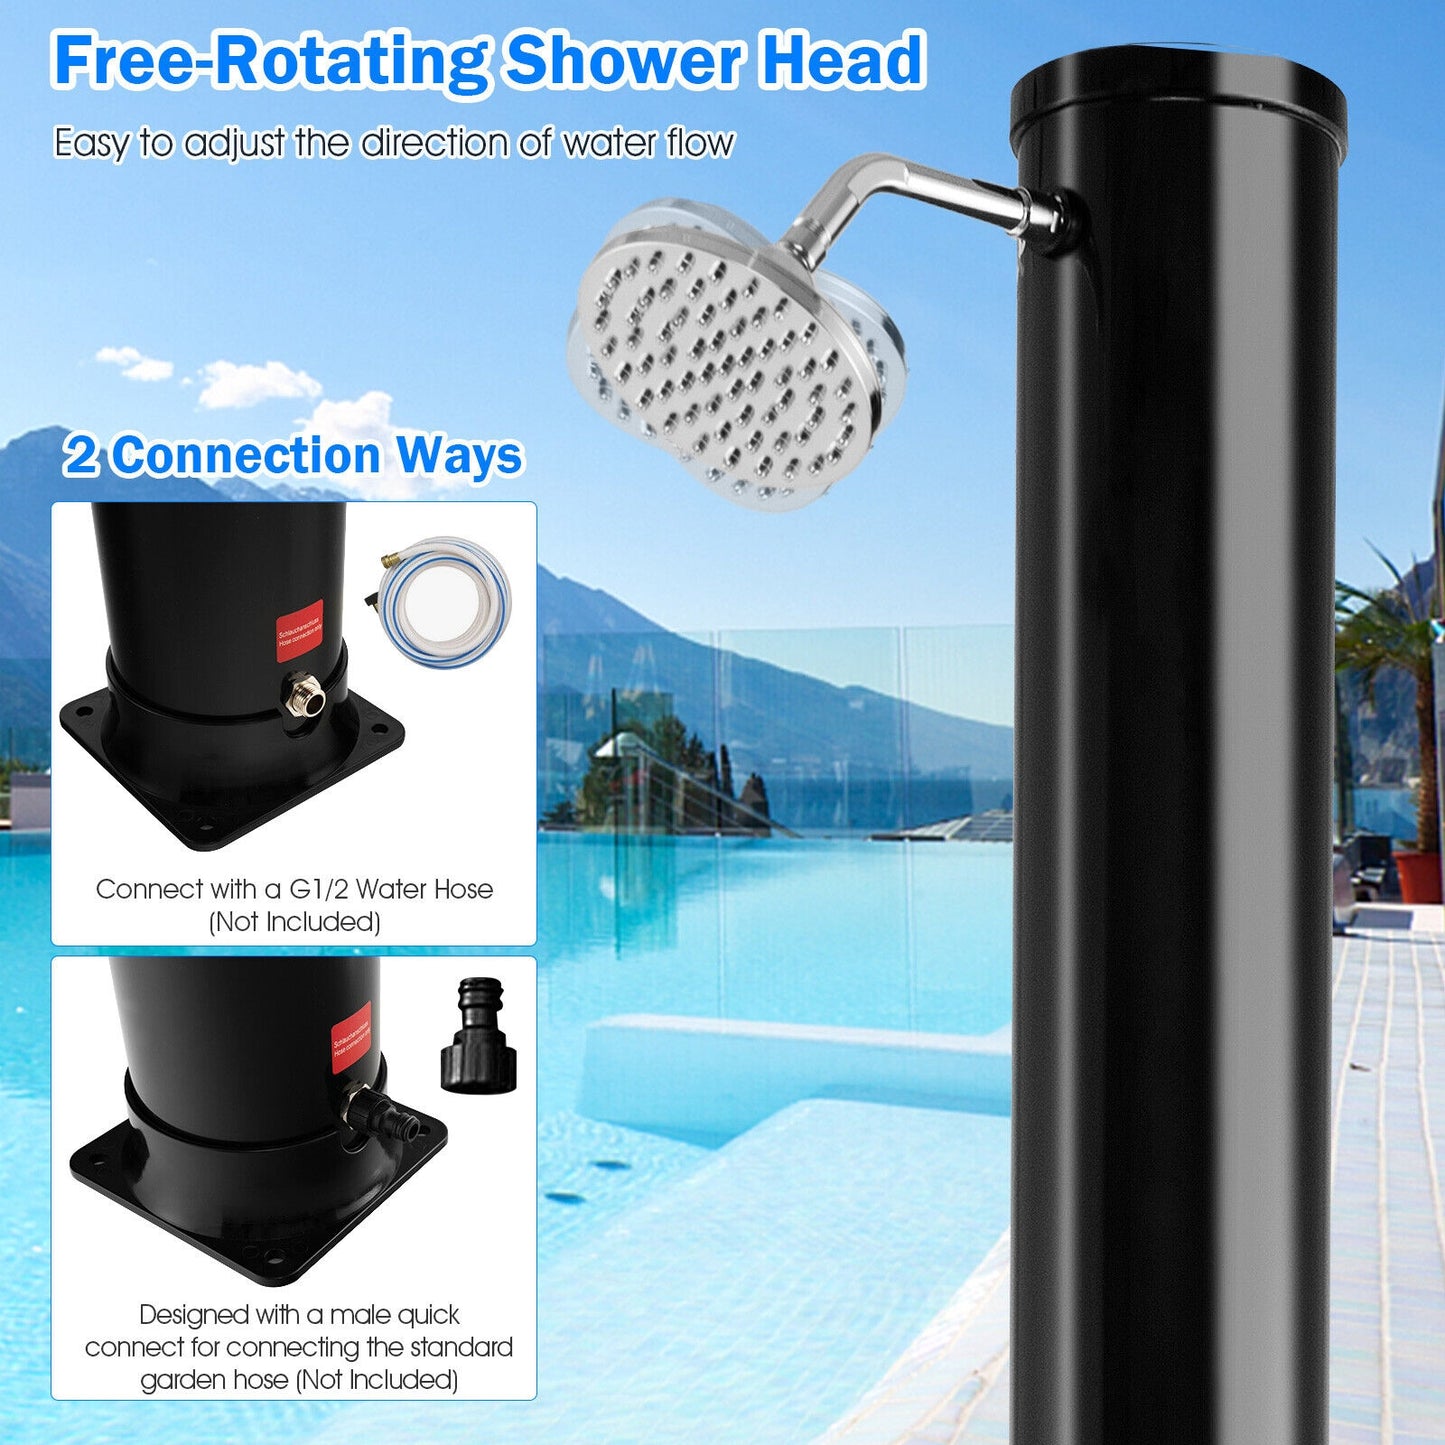 7.2 Feet Solar-Heated Outdoor Shower with Free-Rotating Shower Head-Black